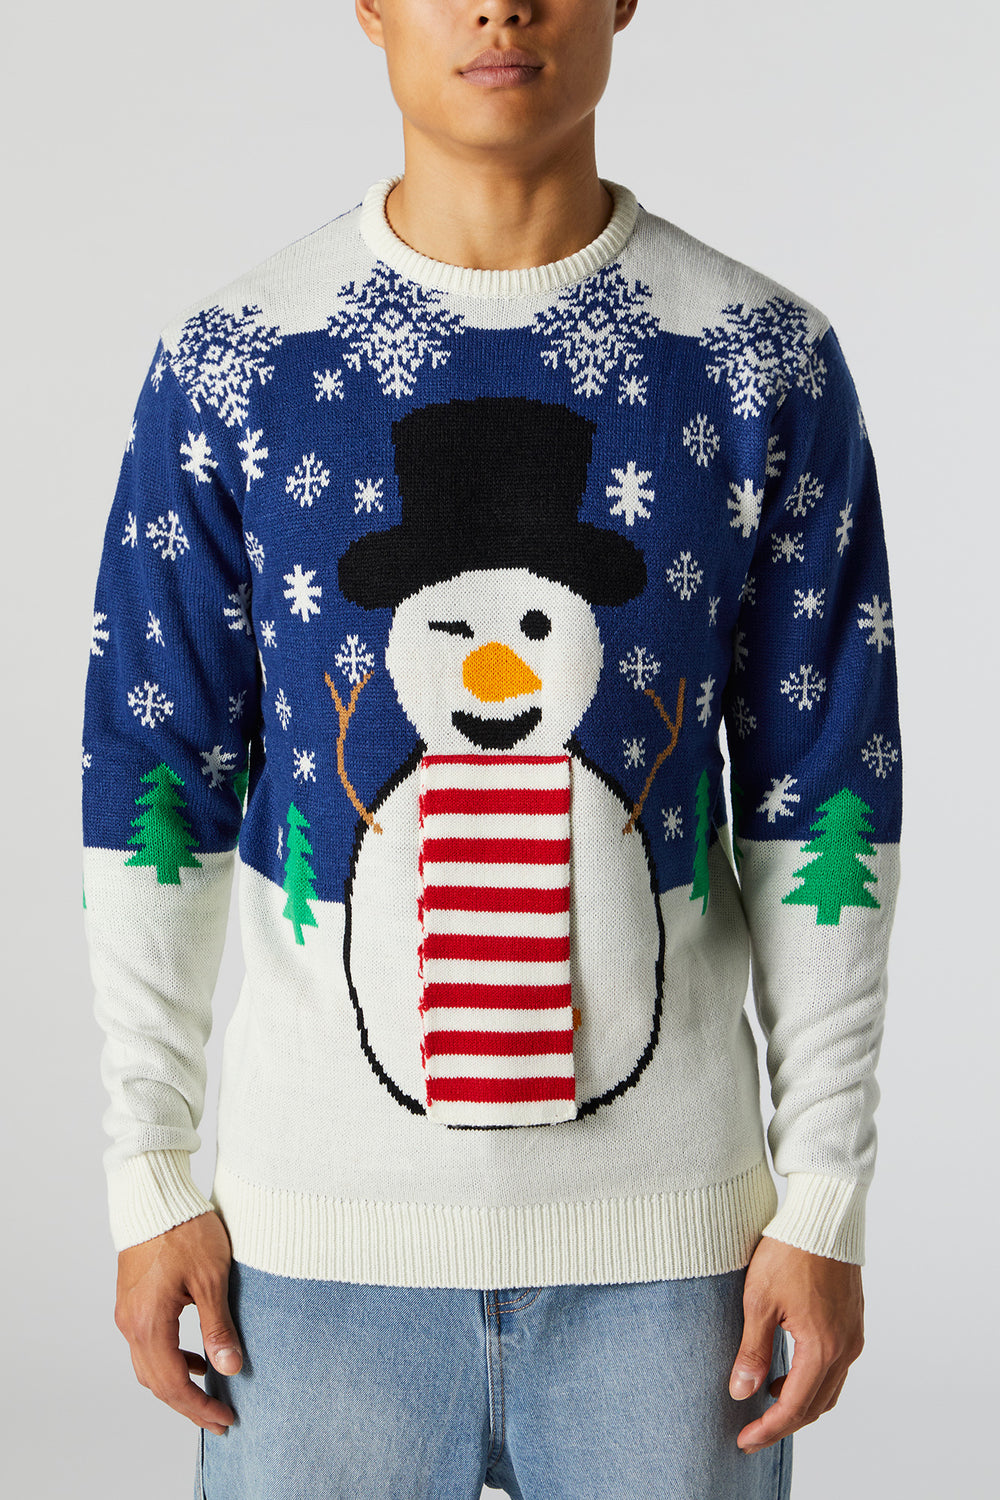 3D Snowman Ugly Xmas Sweater 3D Snowman Ugly Xmas Sweater 4